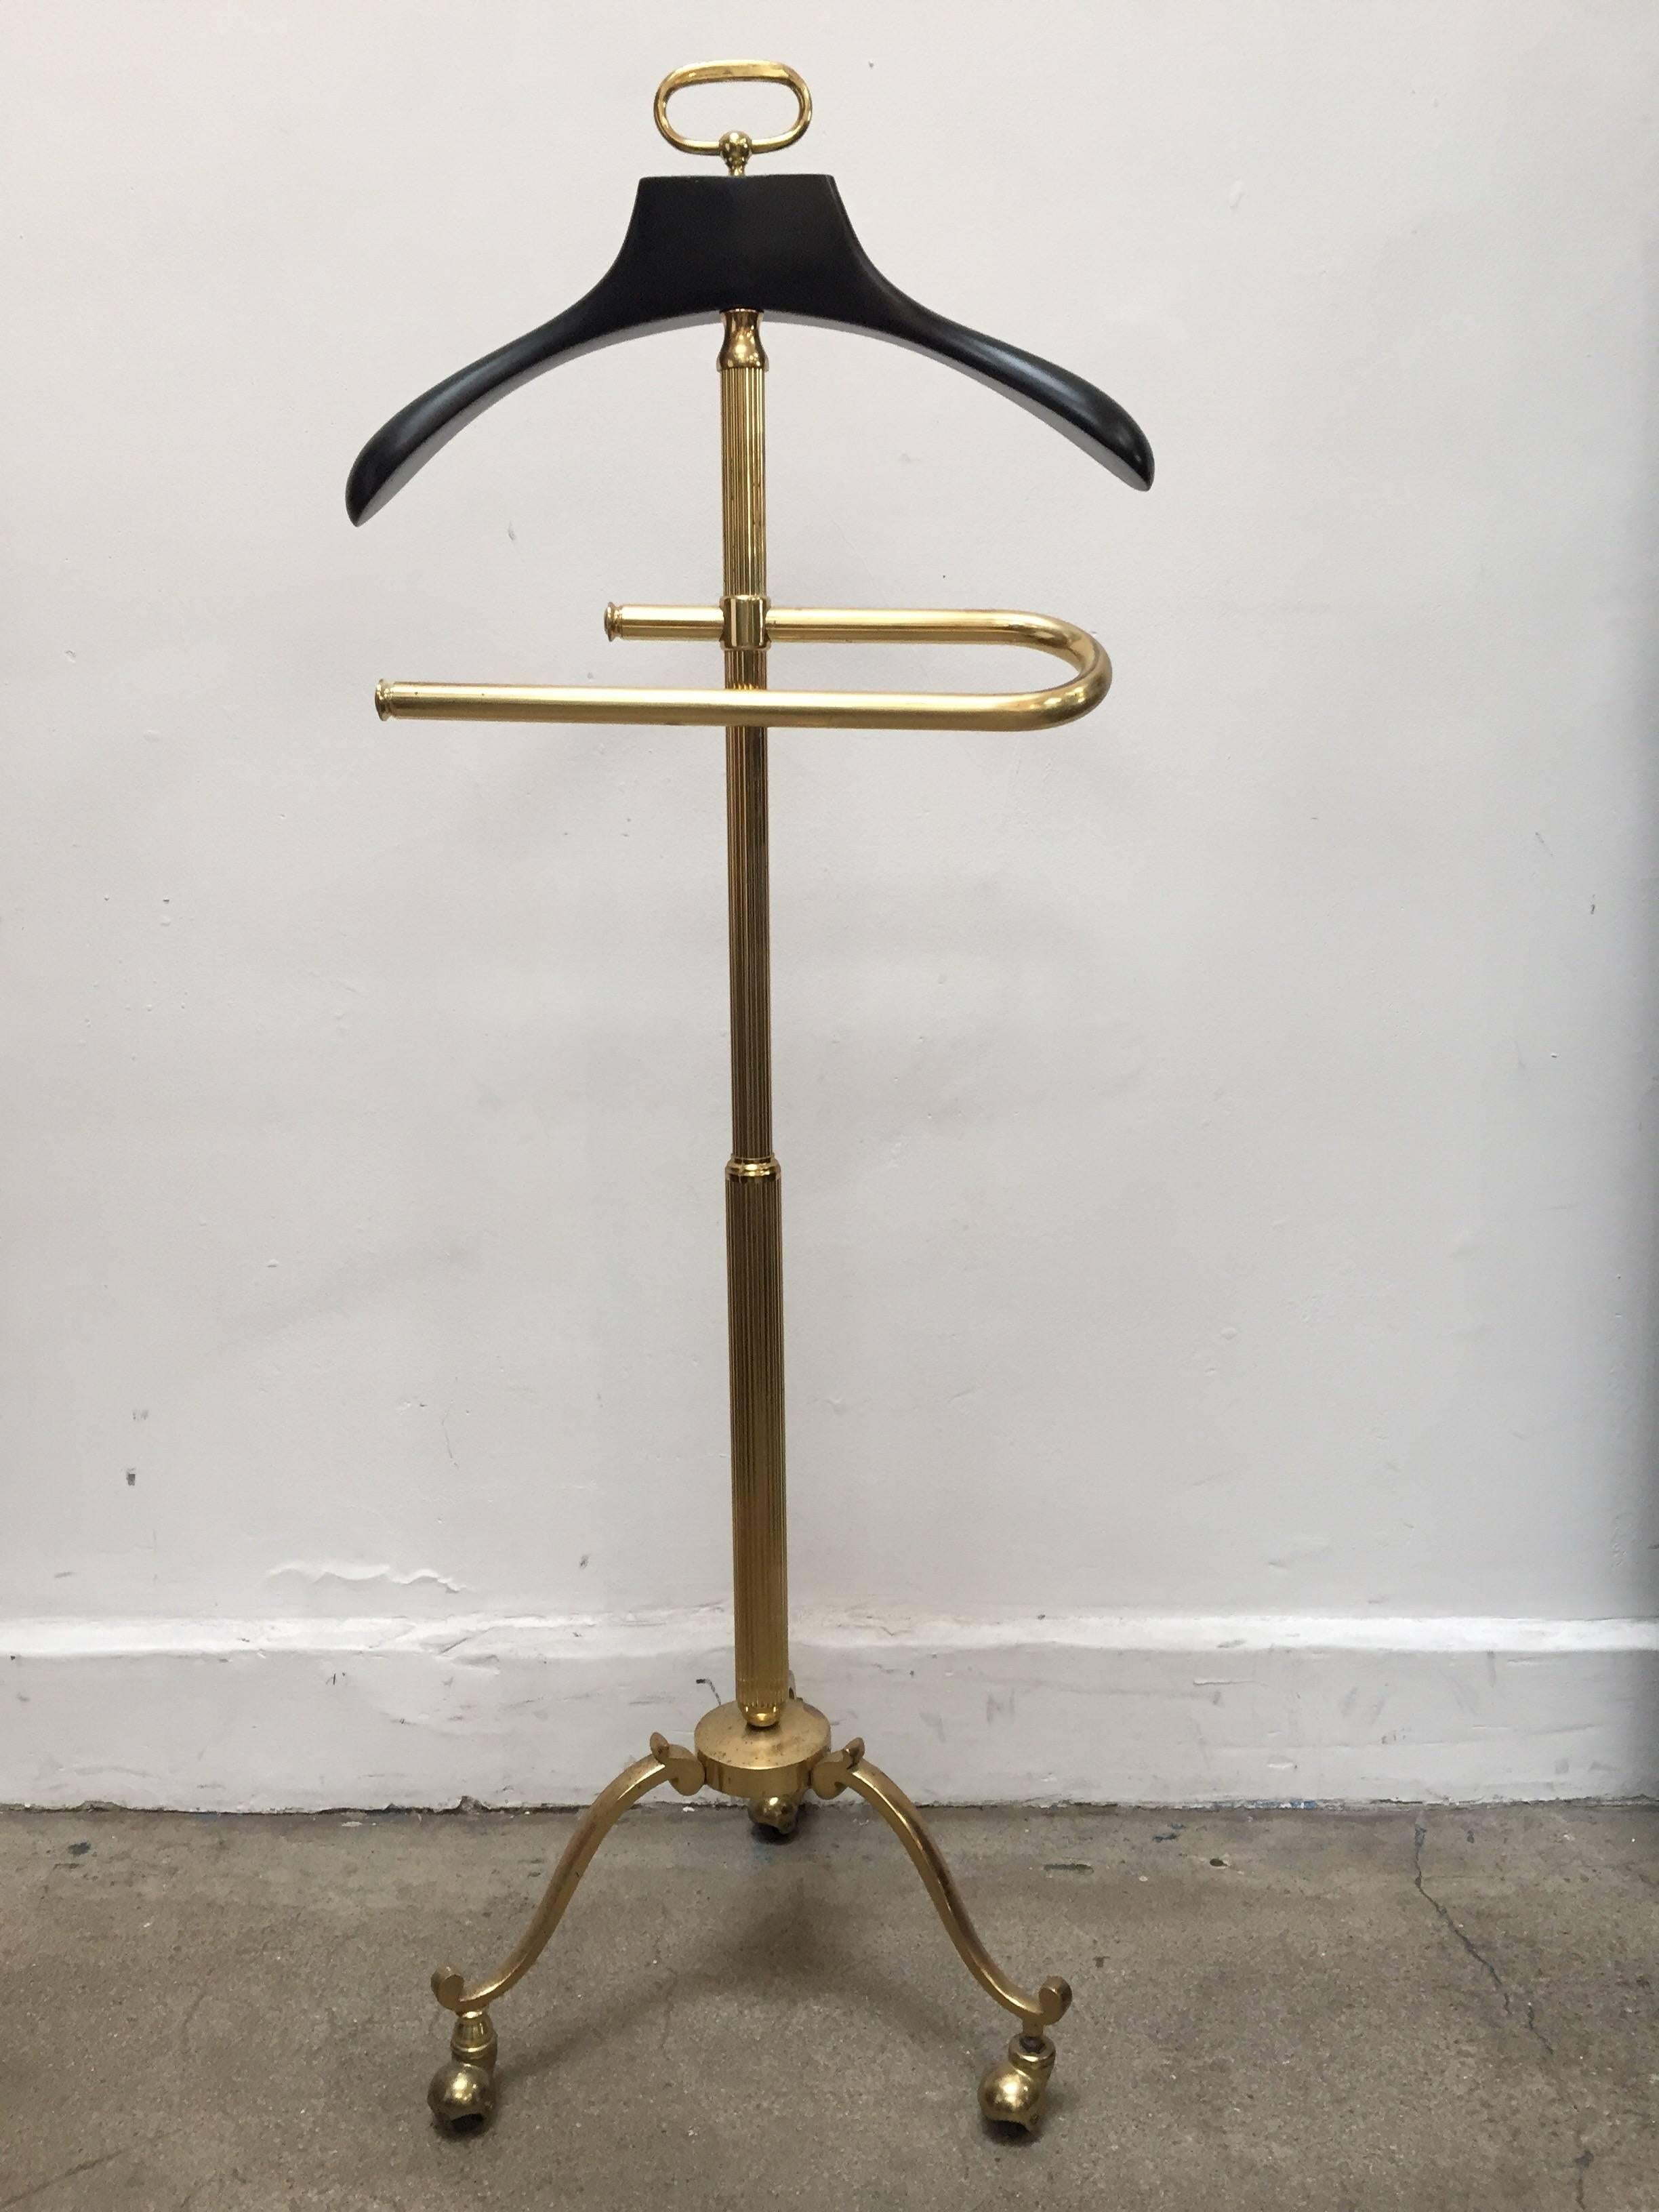 Stylish Italian gentleman polished brass glamorous valet stand.
Impressive Mastercraft polished brass valet stand, with a wooden coat holder and brass pants holder and brass change and jewelry holder on ornate tripod legs.. 
On caster base.